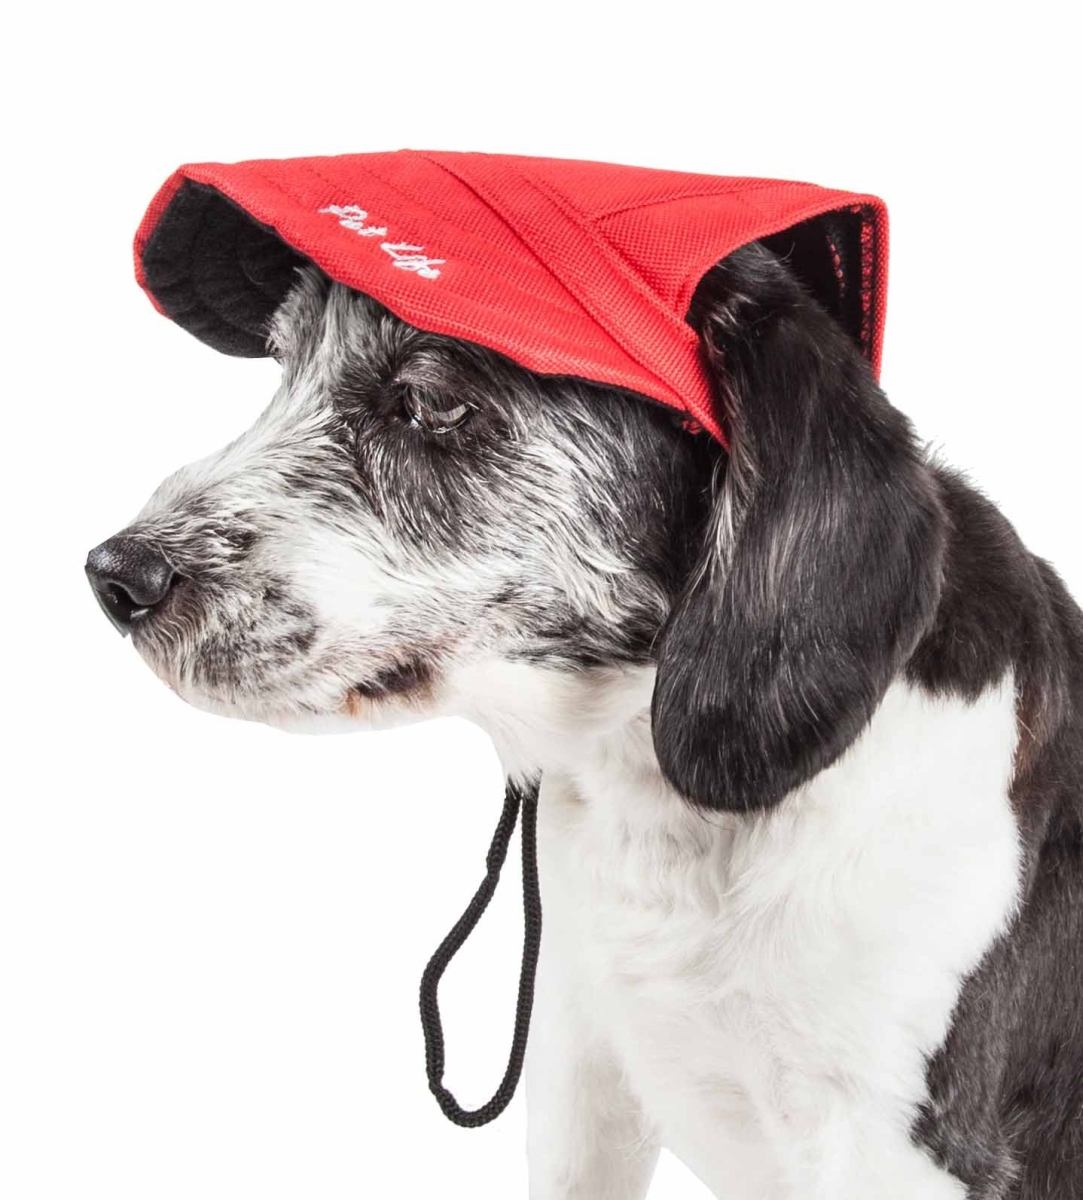 Picture of Pet Life HT6RDLG Cap-Tivating UV Protectant Adjustable Fashion Dog Hat - Red, Large